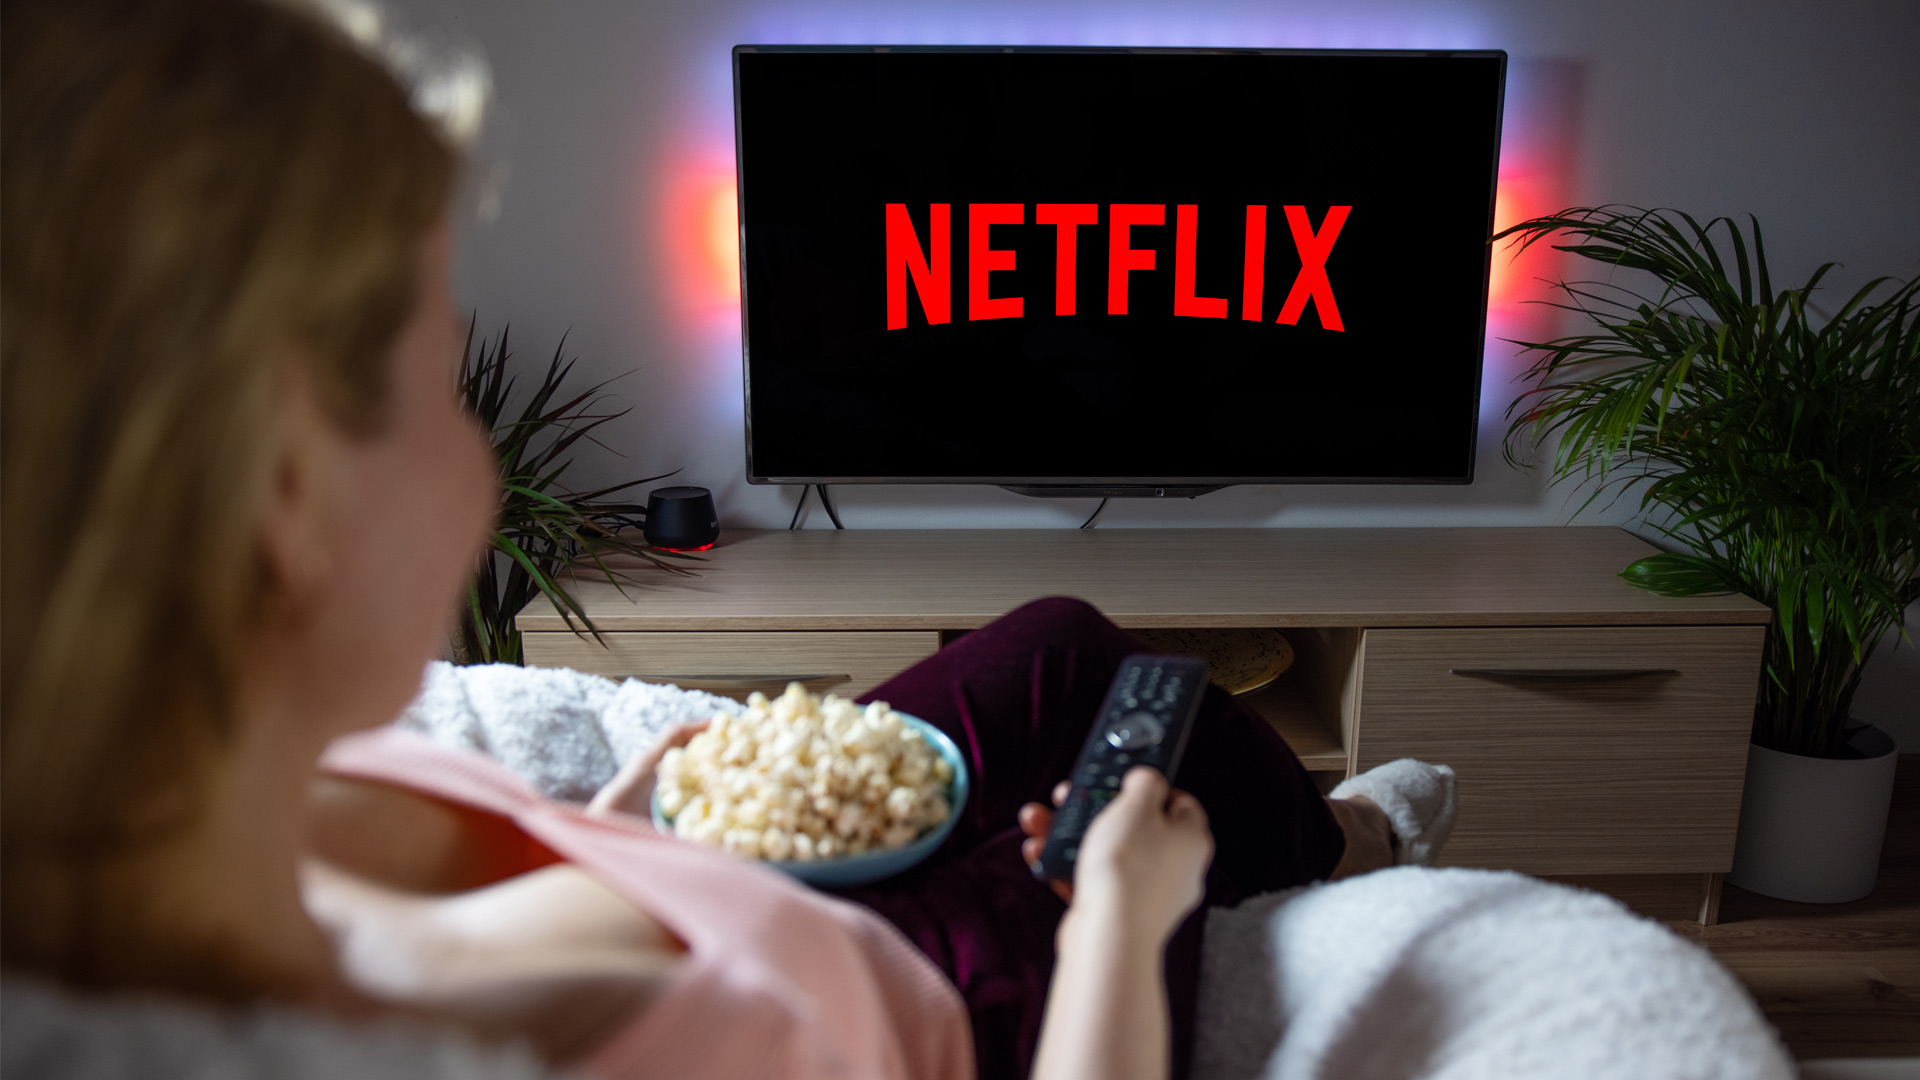 A woman watches Netflix on her TV with a bowl of popcorn in her hand